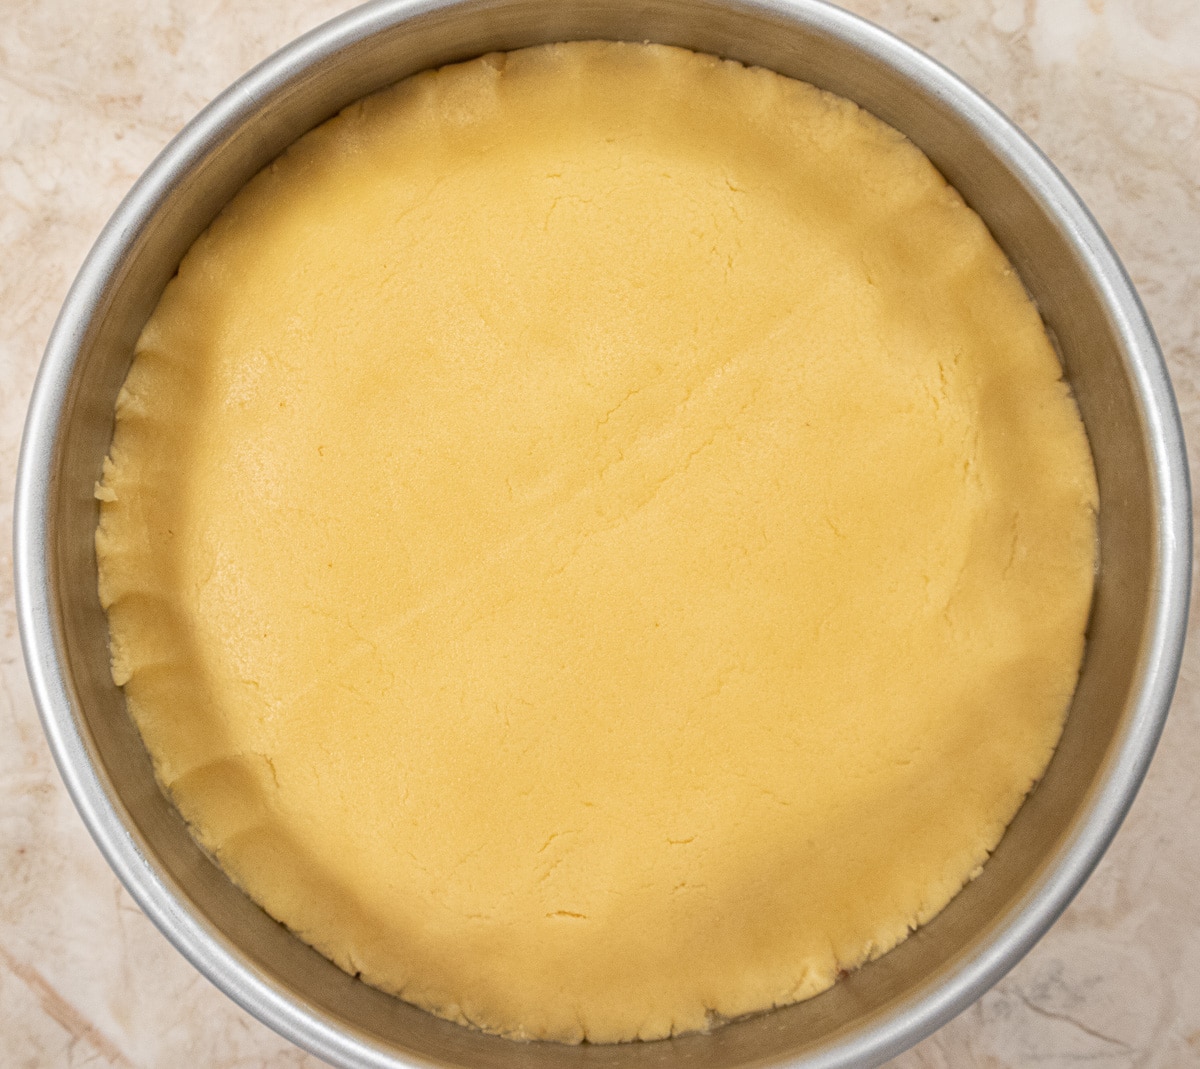 The top crust in place over the filling